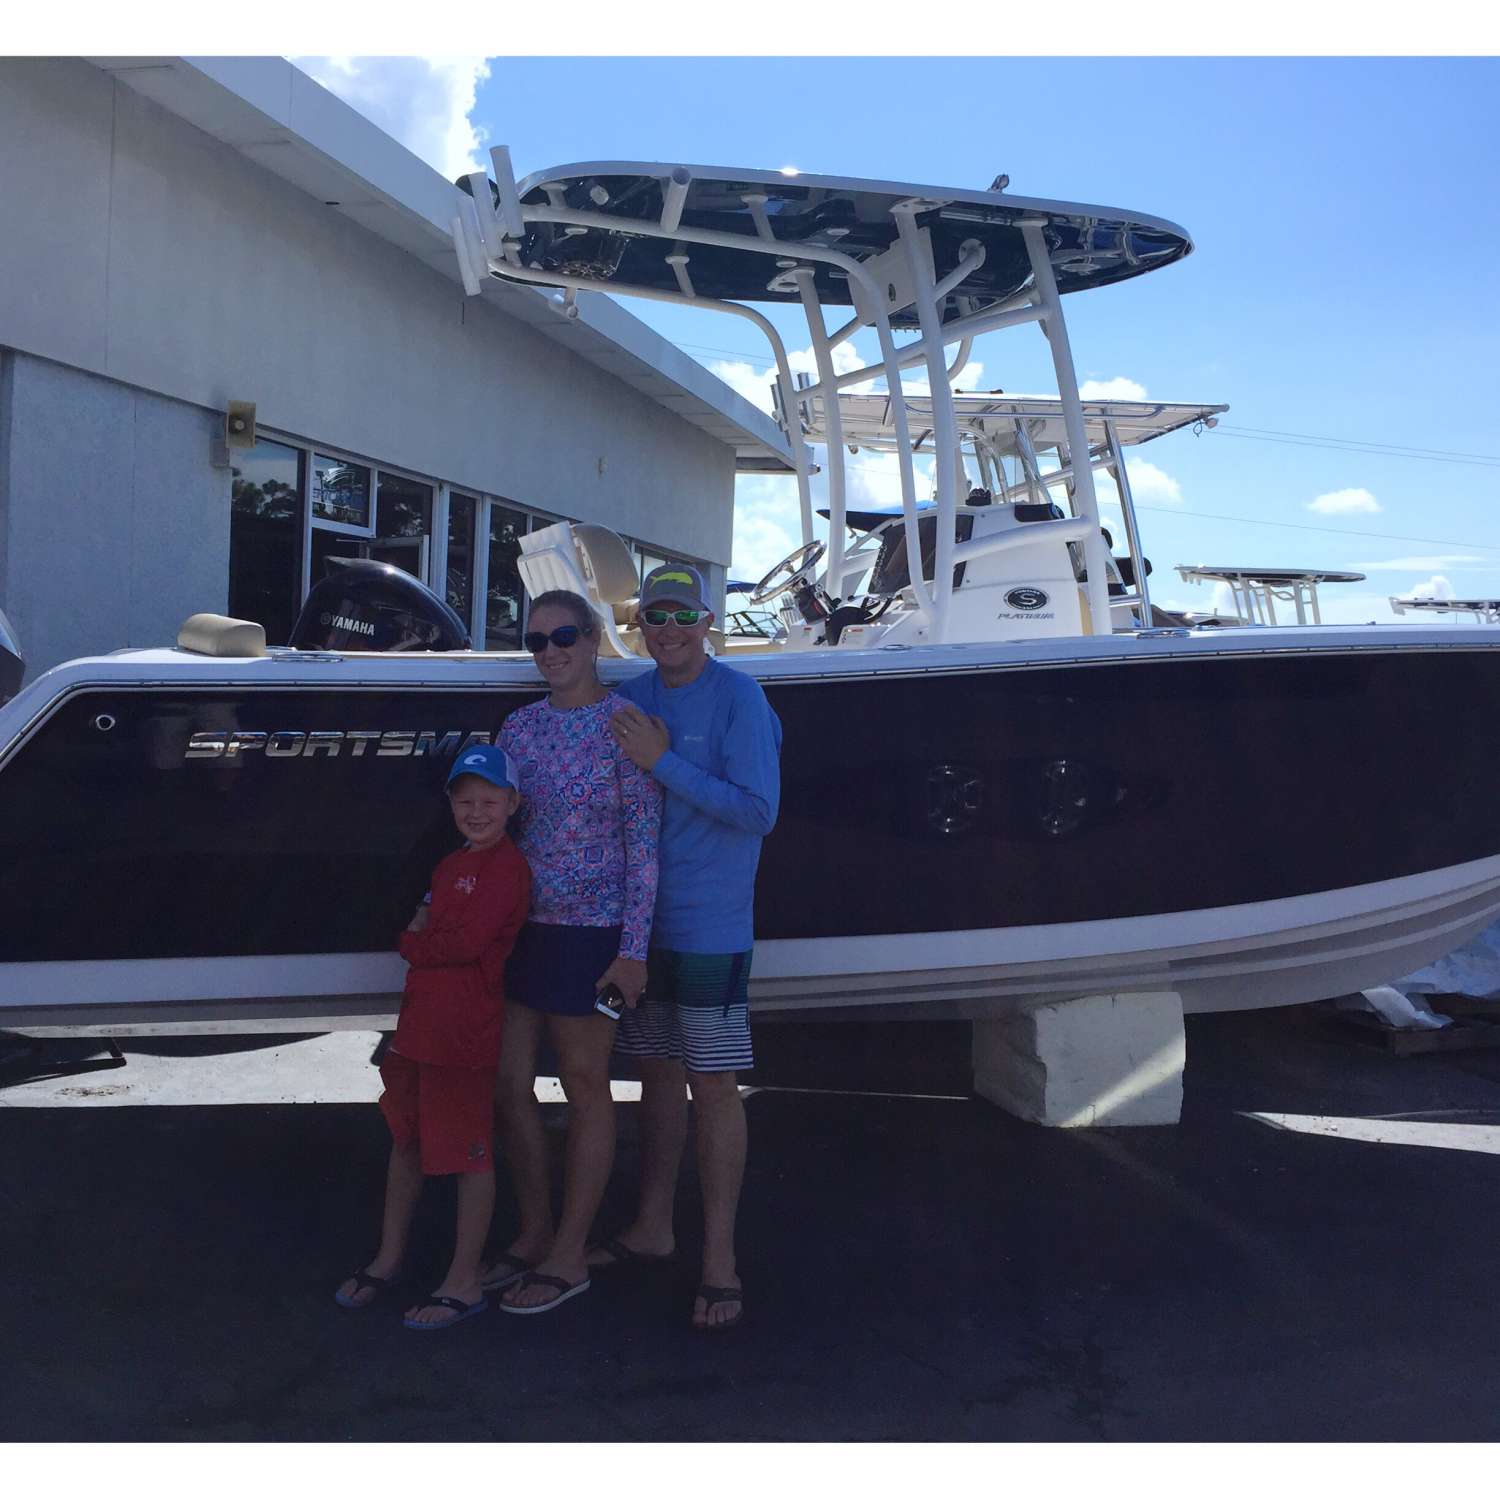 Our very first boat purchase! We couldn't be more excited for this amazing boat!  Great memories ahead!